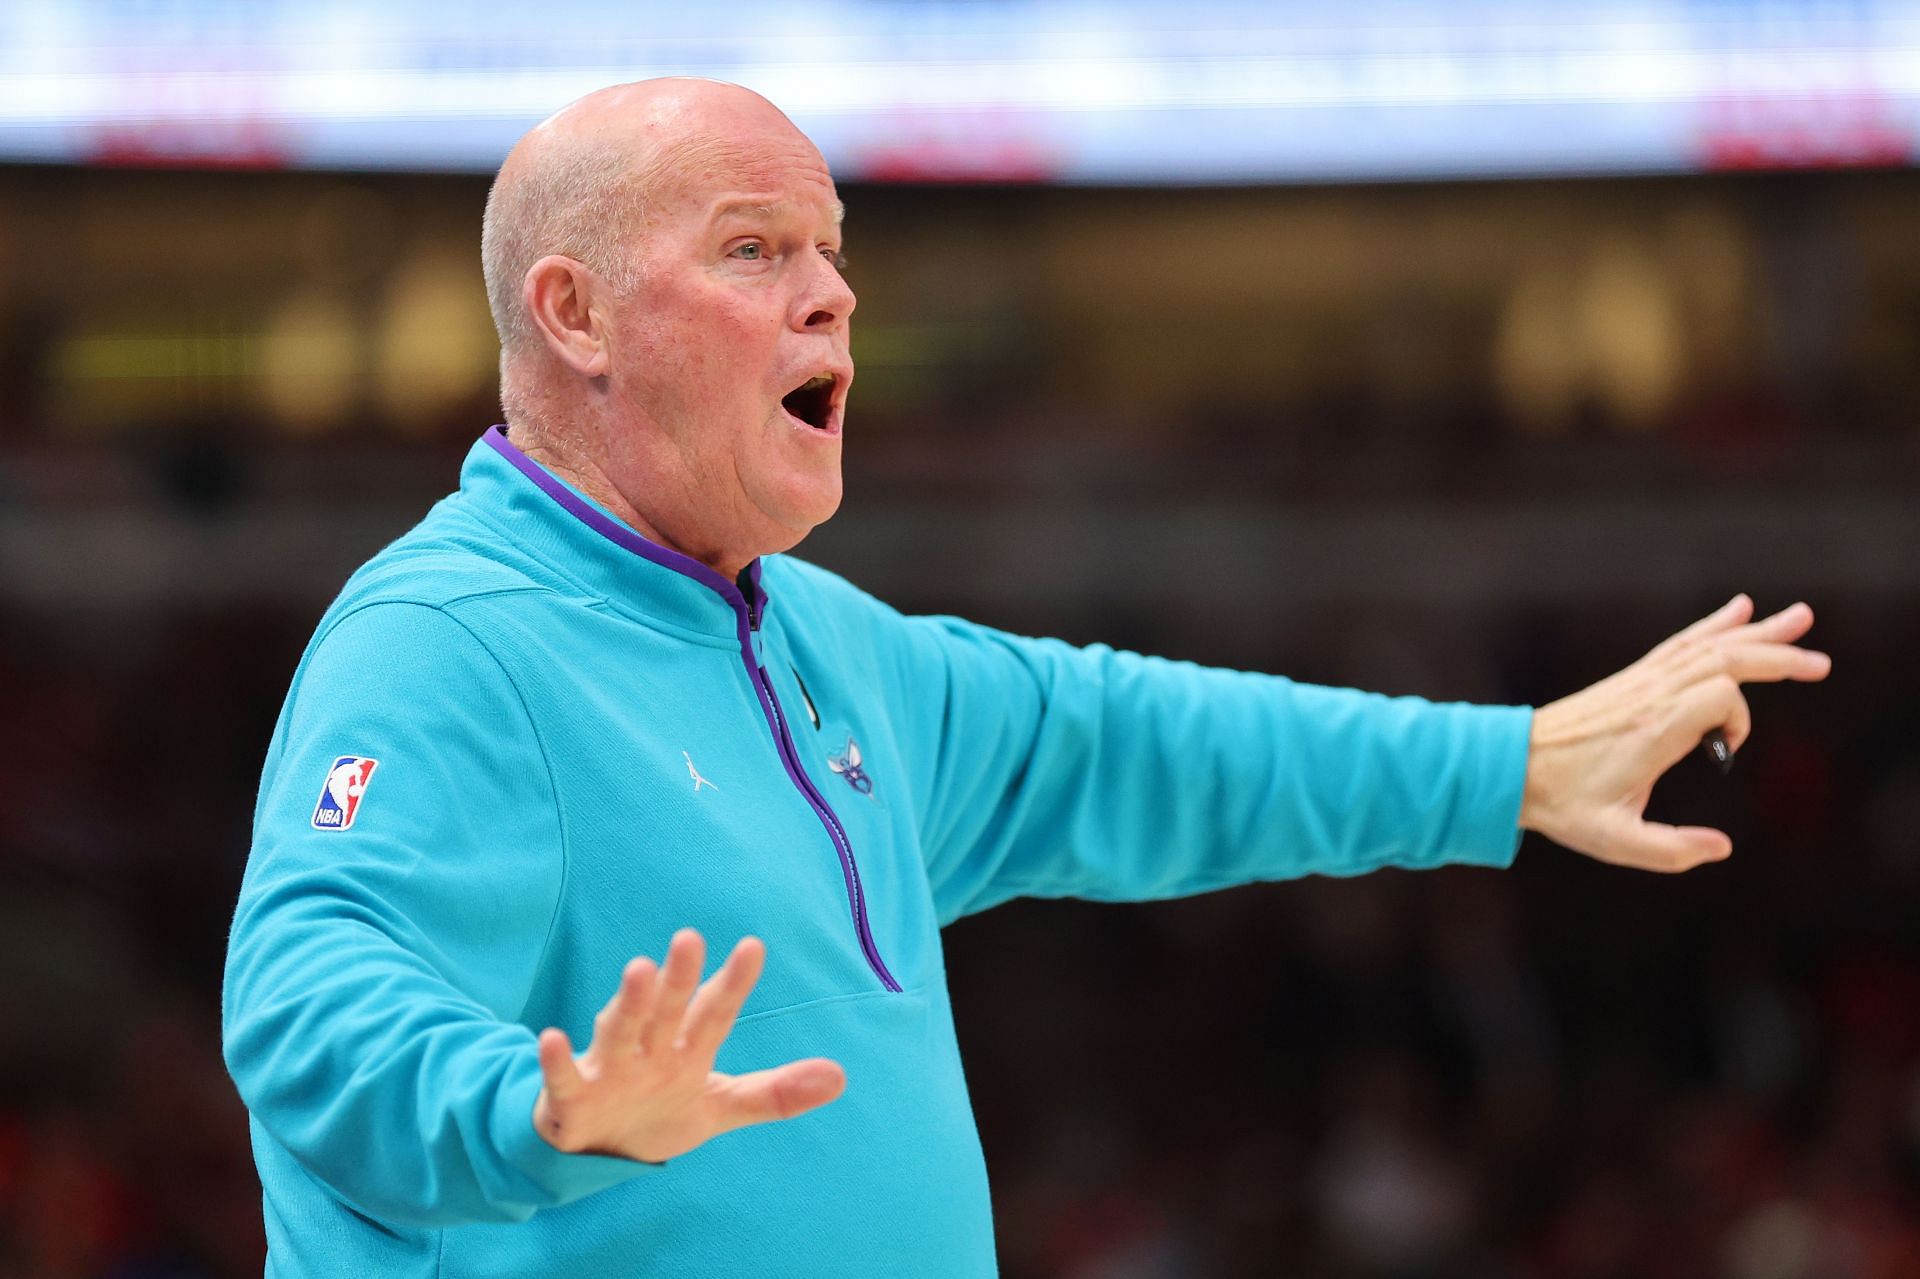 Steve Clifford calls out a play from the sideline